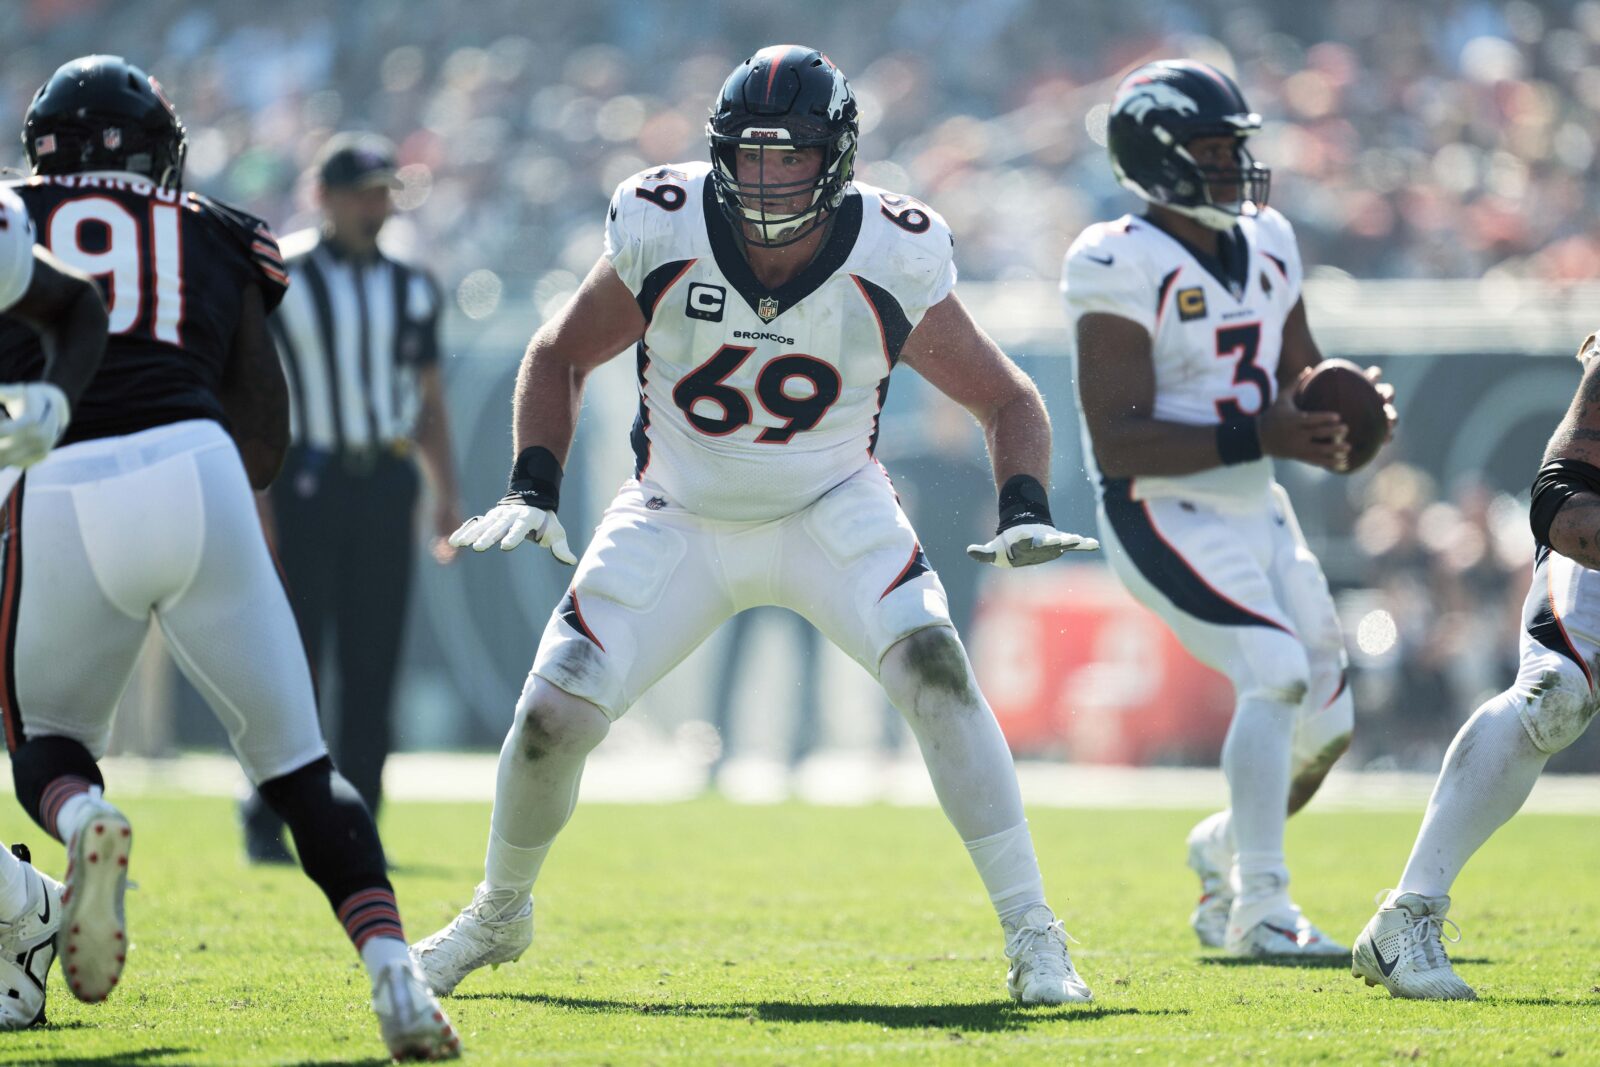 Broncos place Mike McGlinchey on injured reserve, activate young